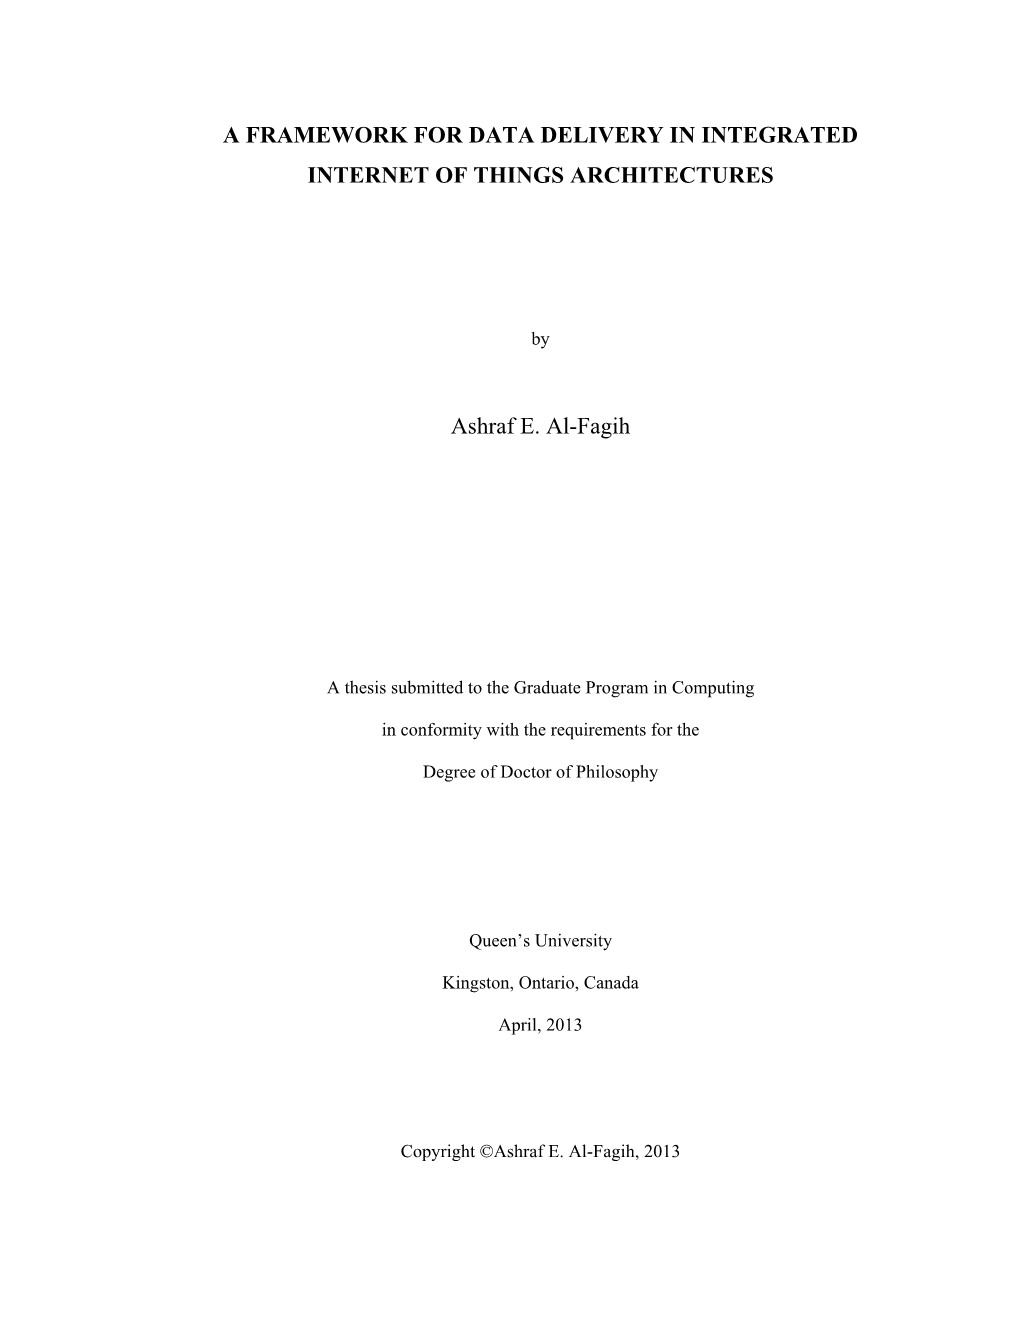 A FRAMEWORK for DATA DELIVERY in INTEGRATED INTERNET of THINGS ARCHITECTURES Ashraf E. Al-Fagih